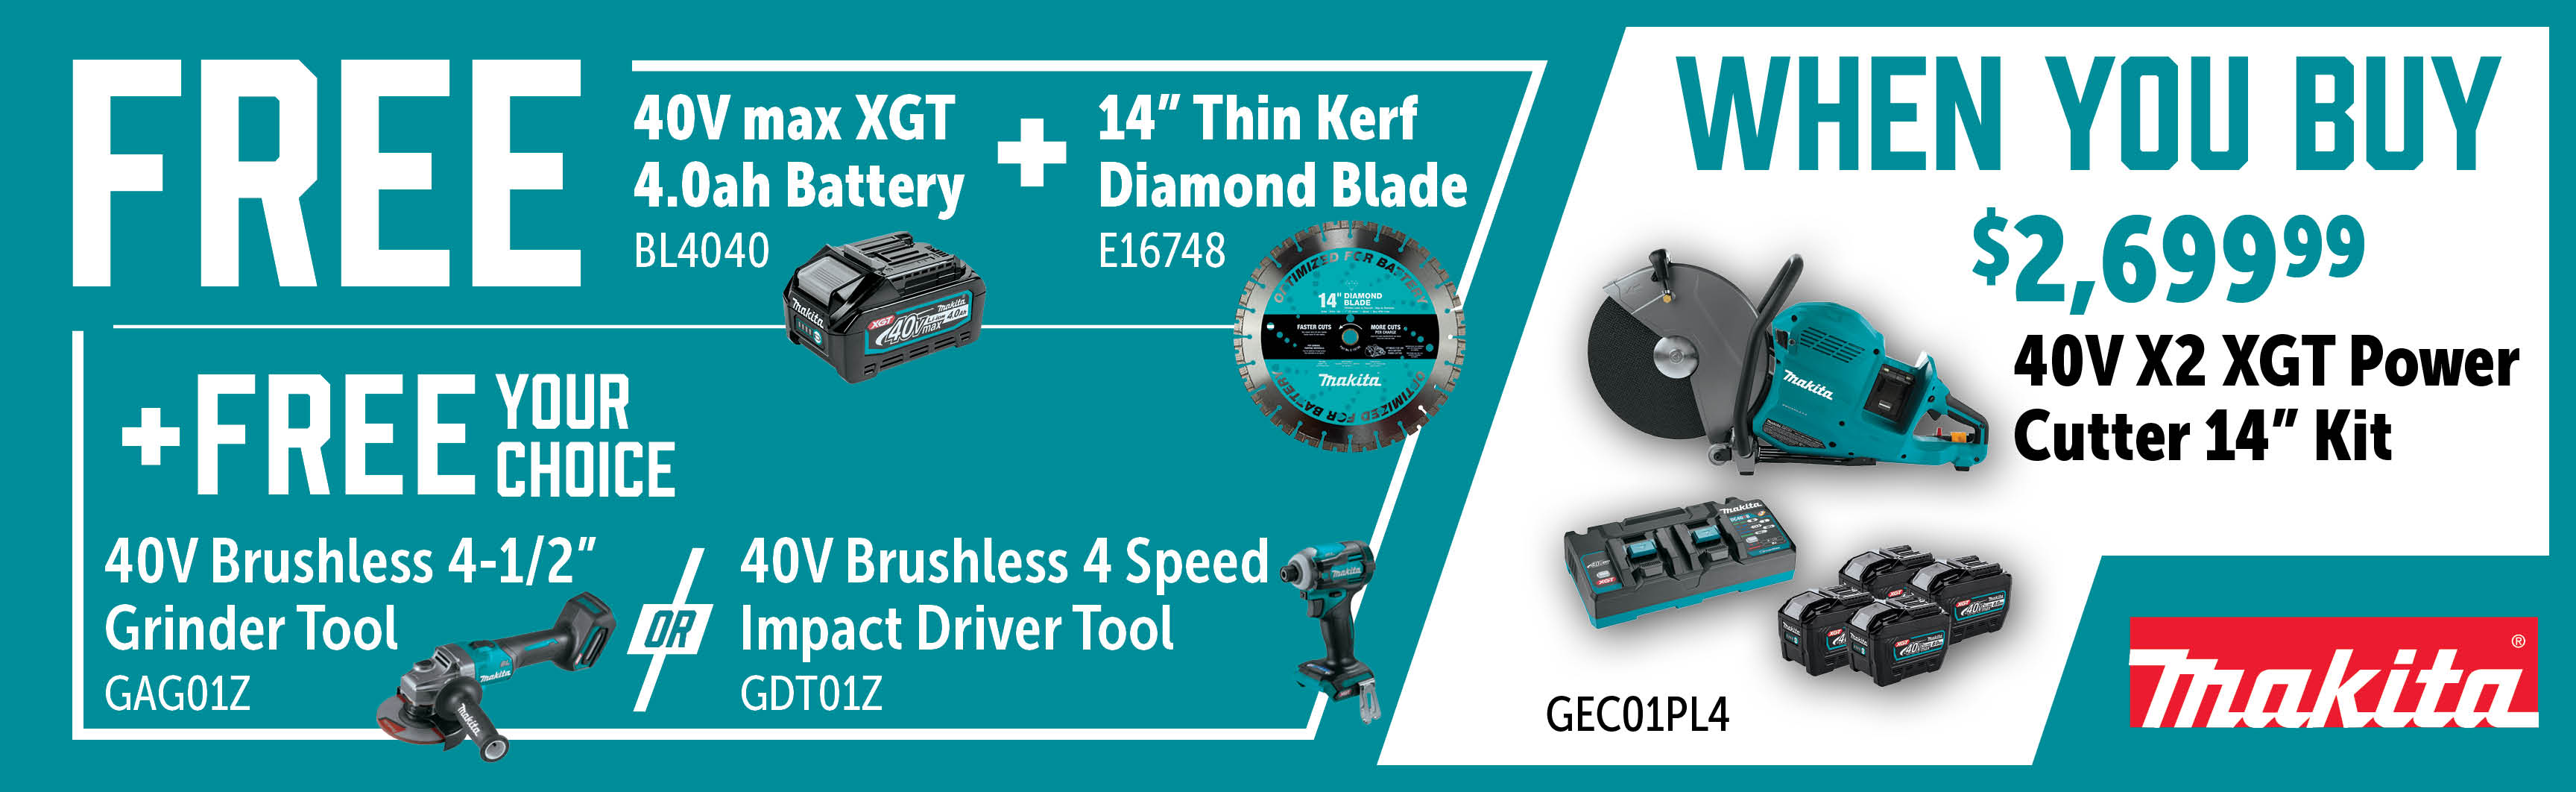 Makita Aug-Oct: Buy a GEC01PL4 and Get a Free GAG01Z or GDT01Z and a BL4040 and a E16748